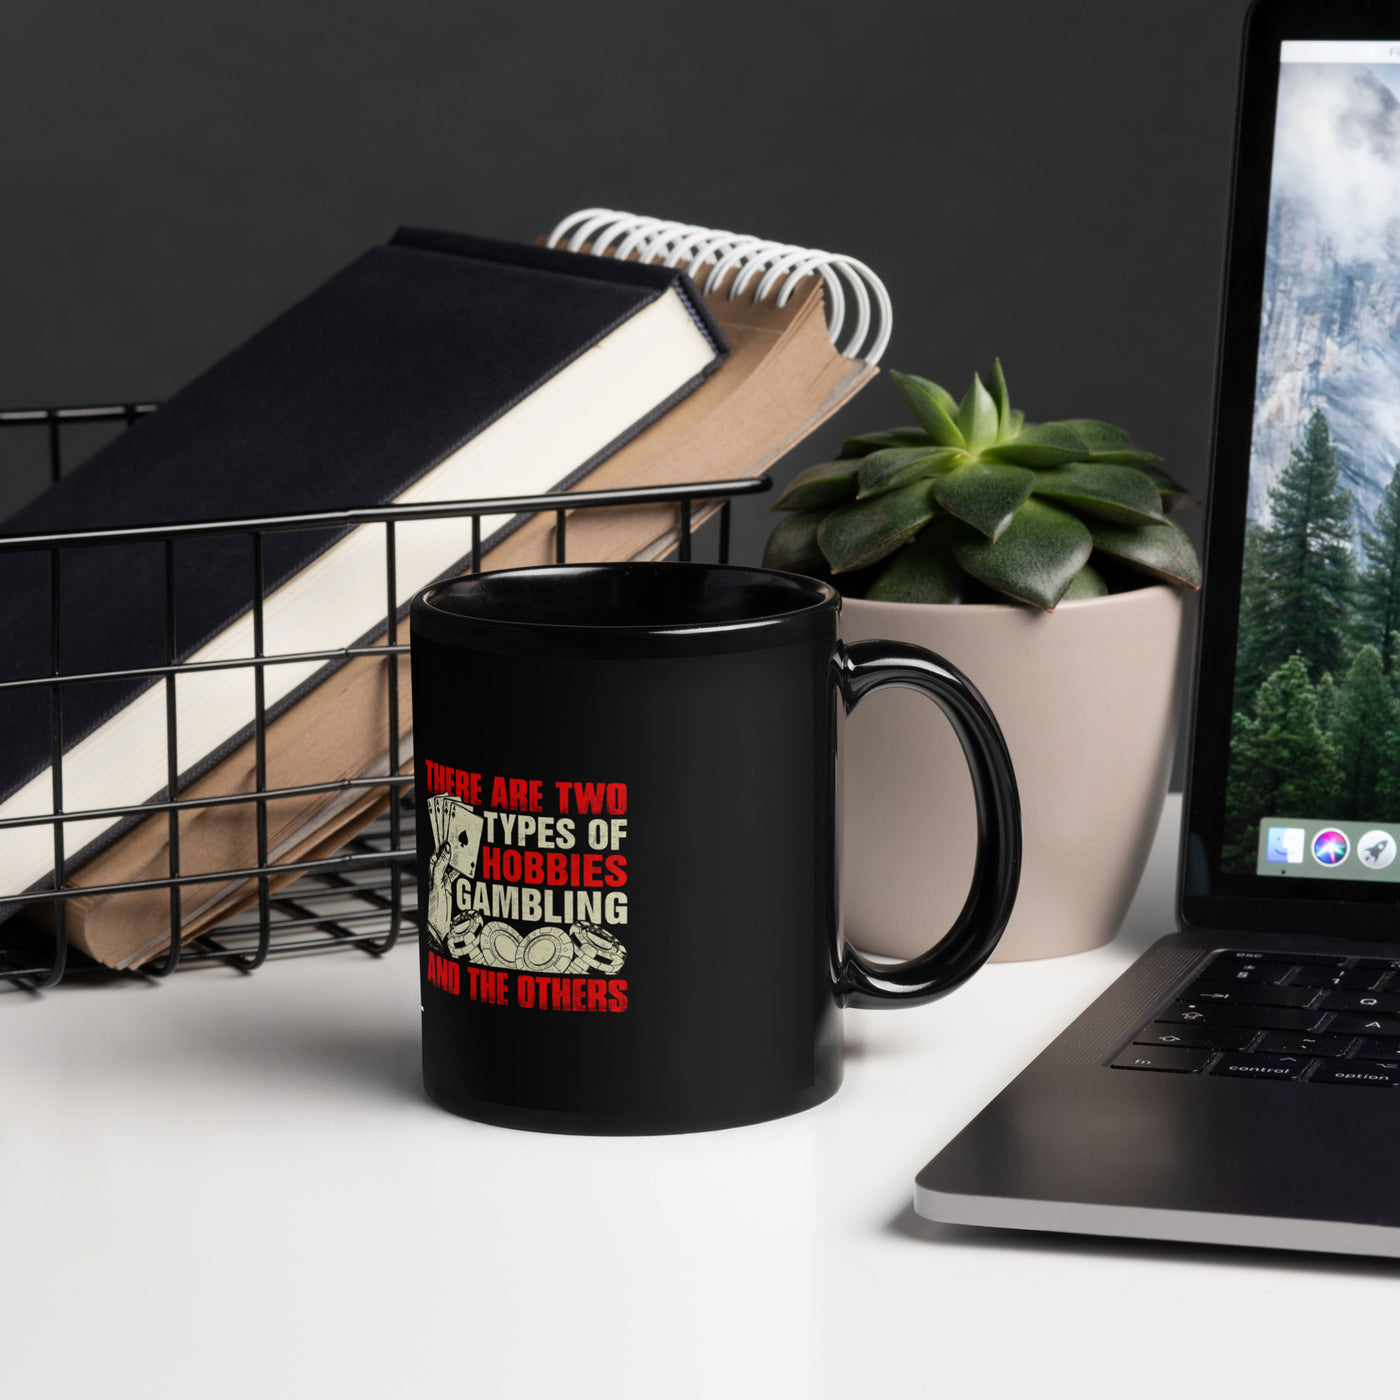 There Are two types of Hobbies; Gambling and the others - Black Glossy Mug